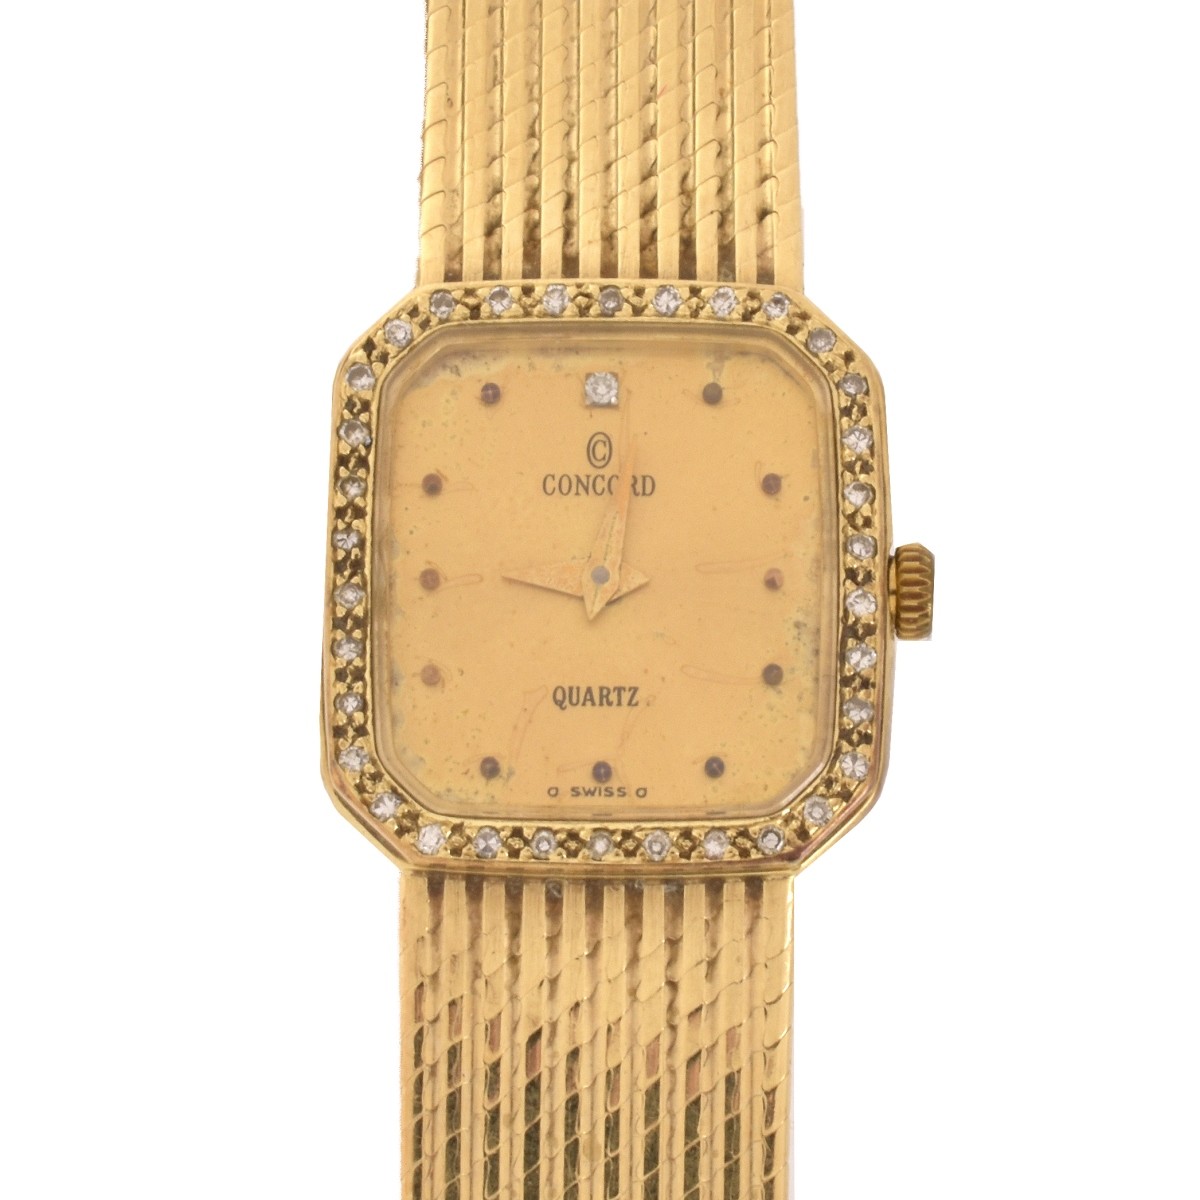 Lady's Concord 14K Watch